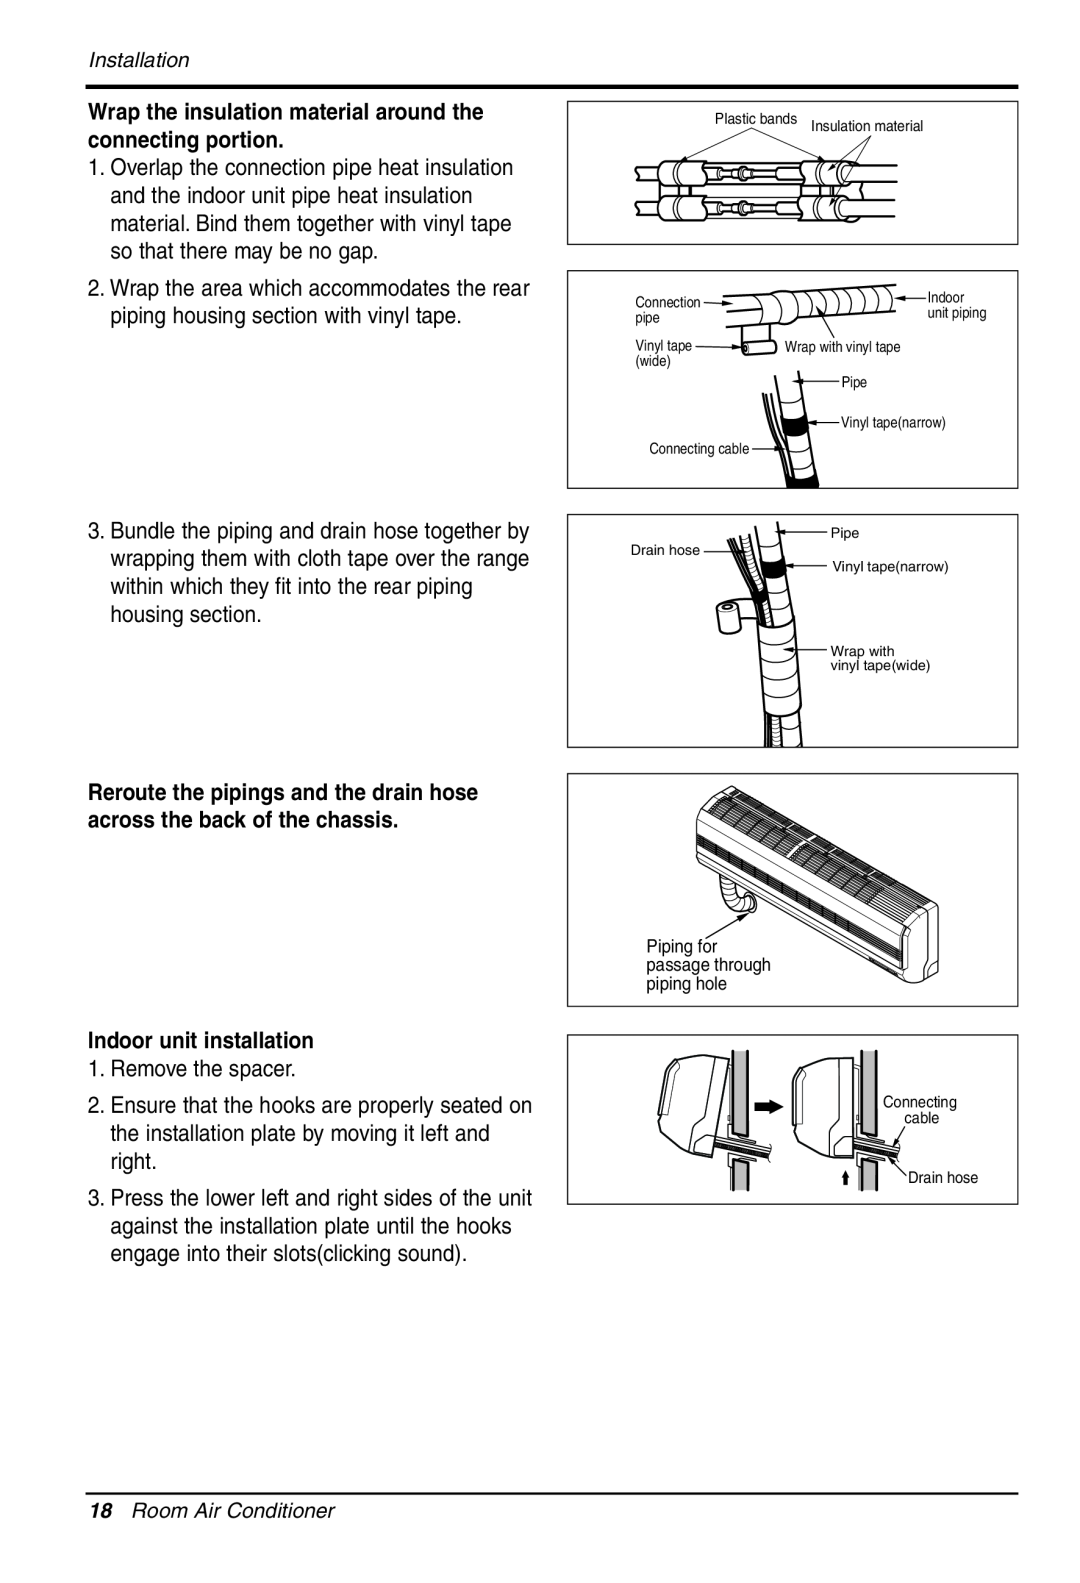 LG Electronics LS305HV installation manual Remove the spacer 